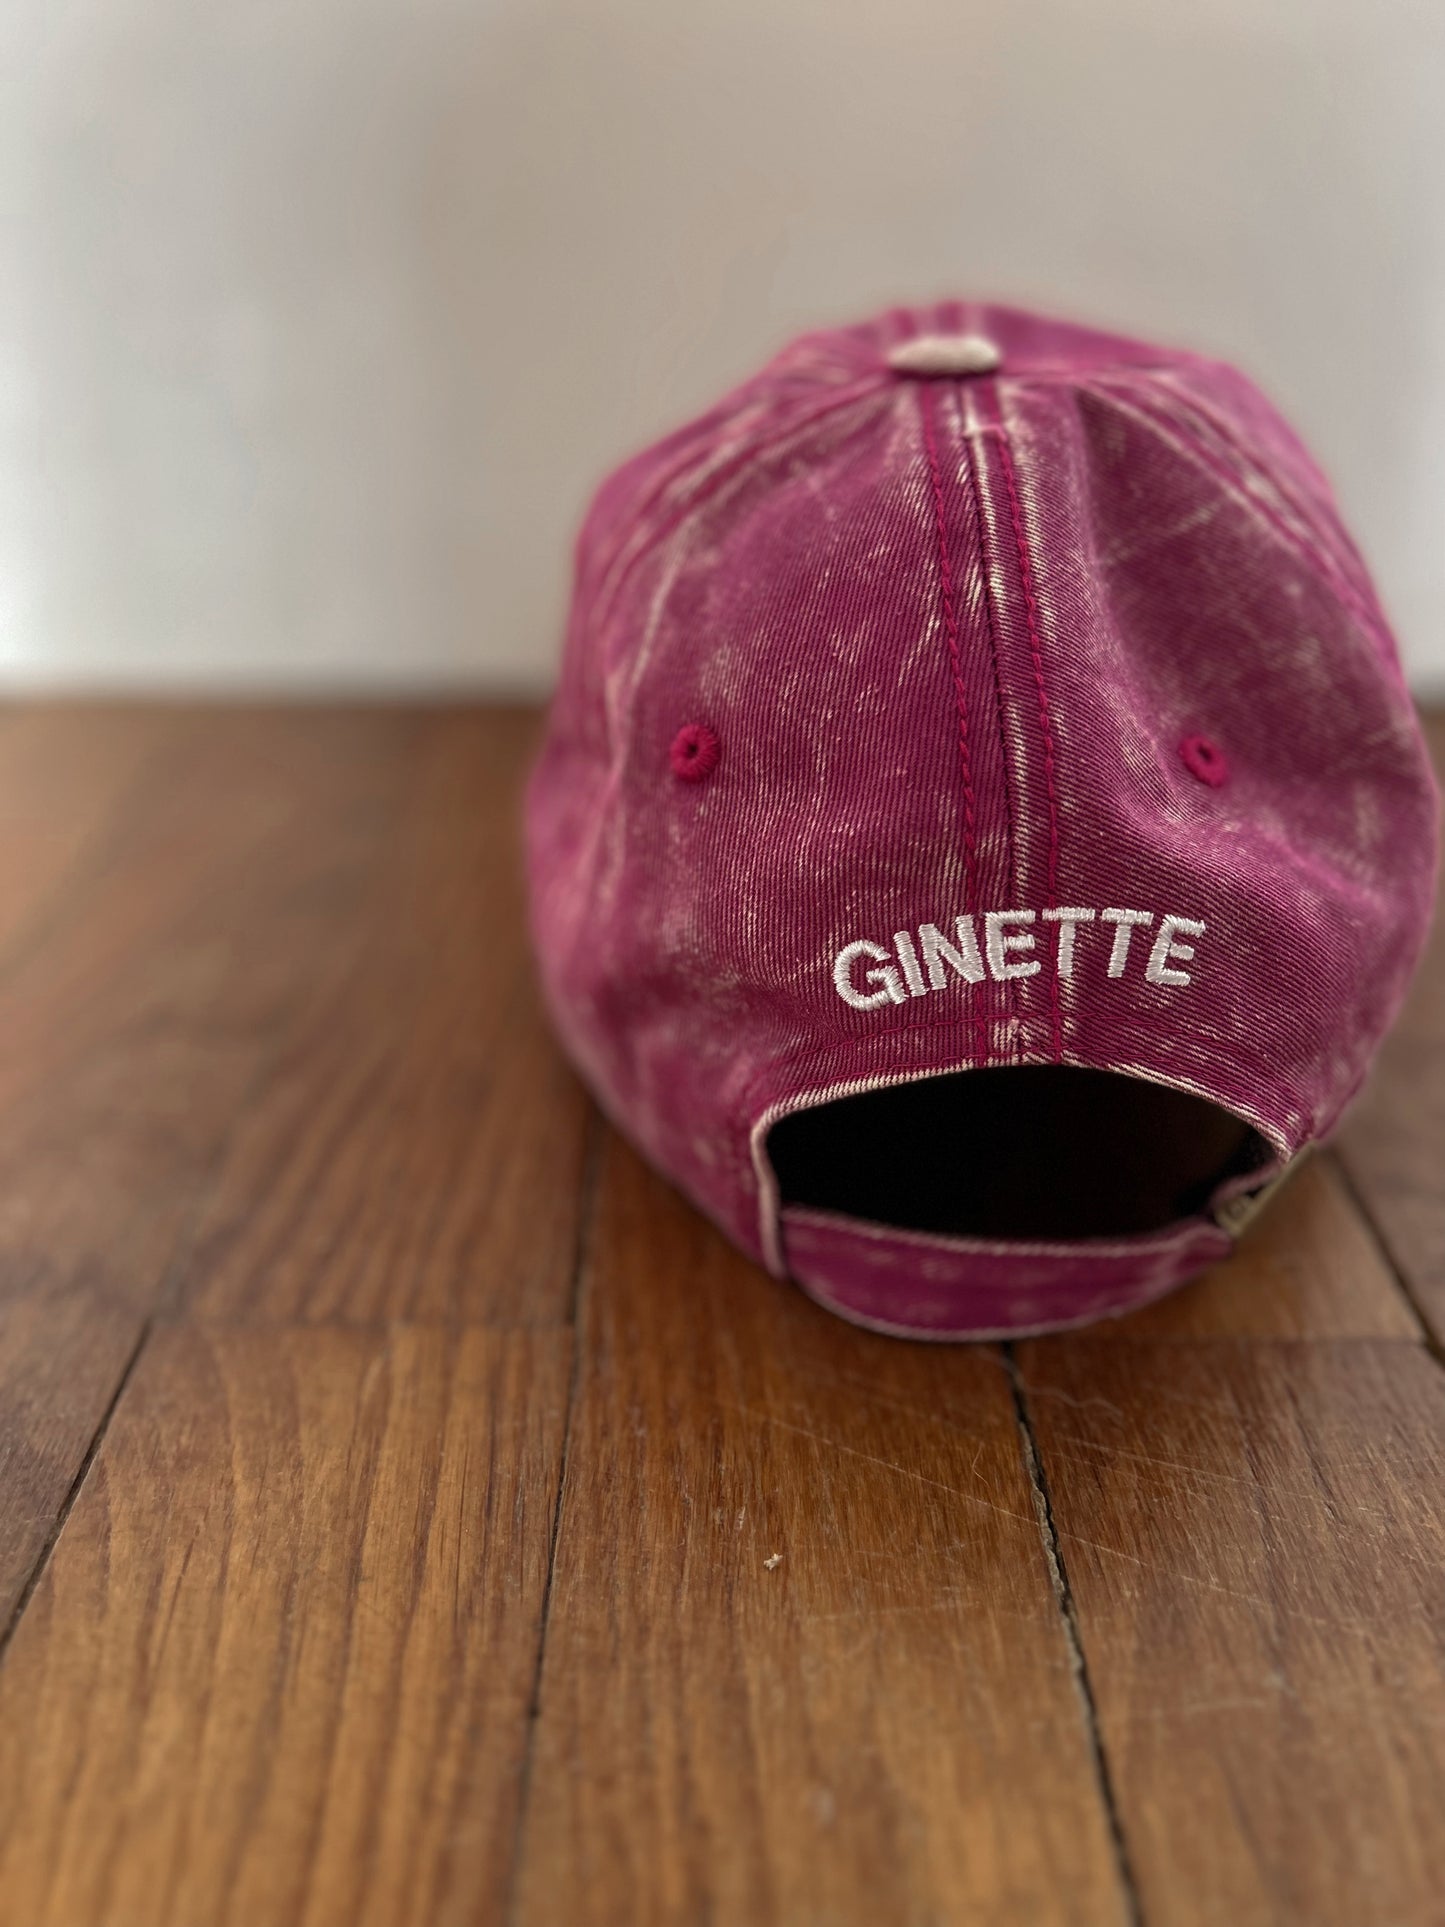 The Ginette cap - Pink